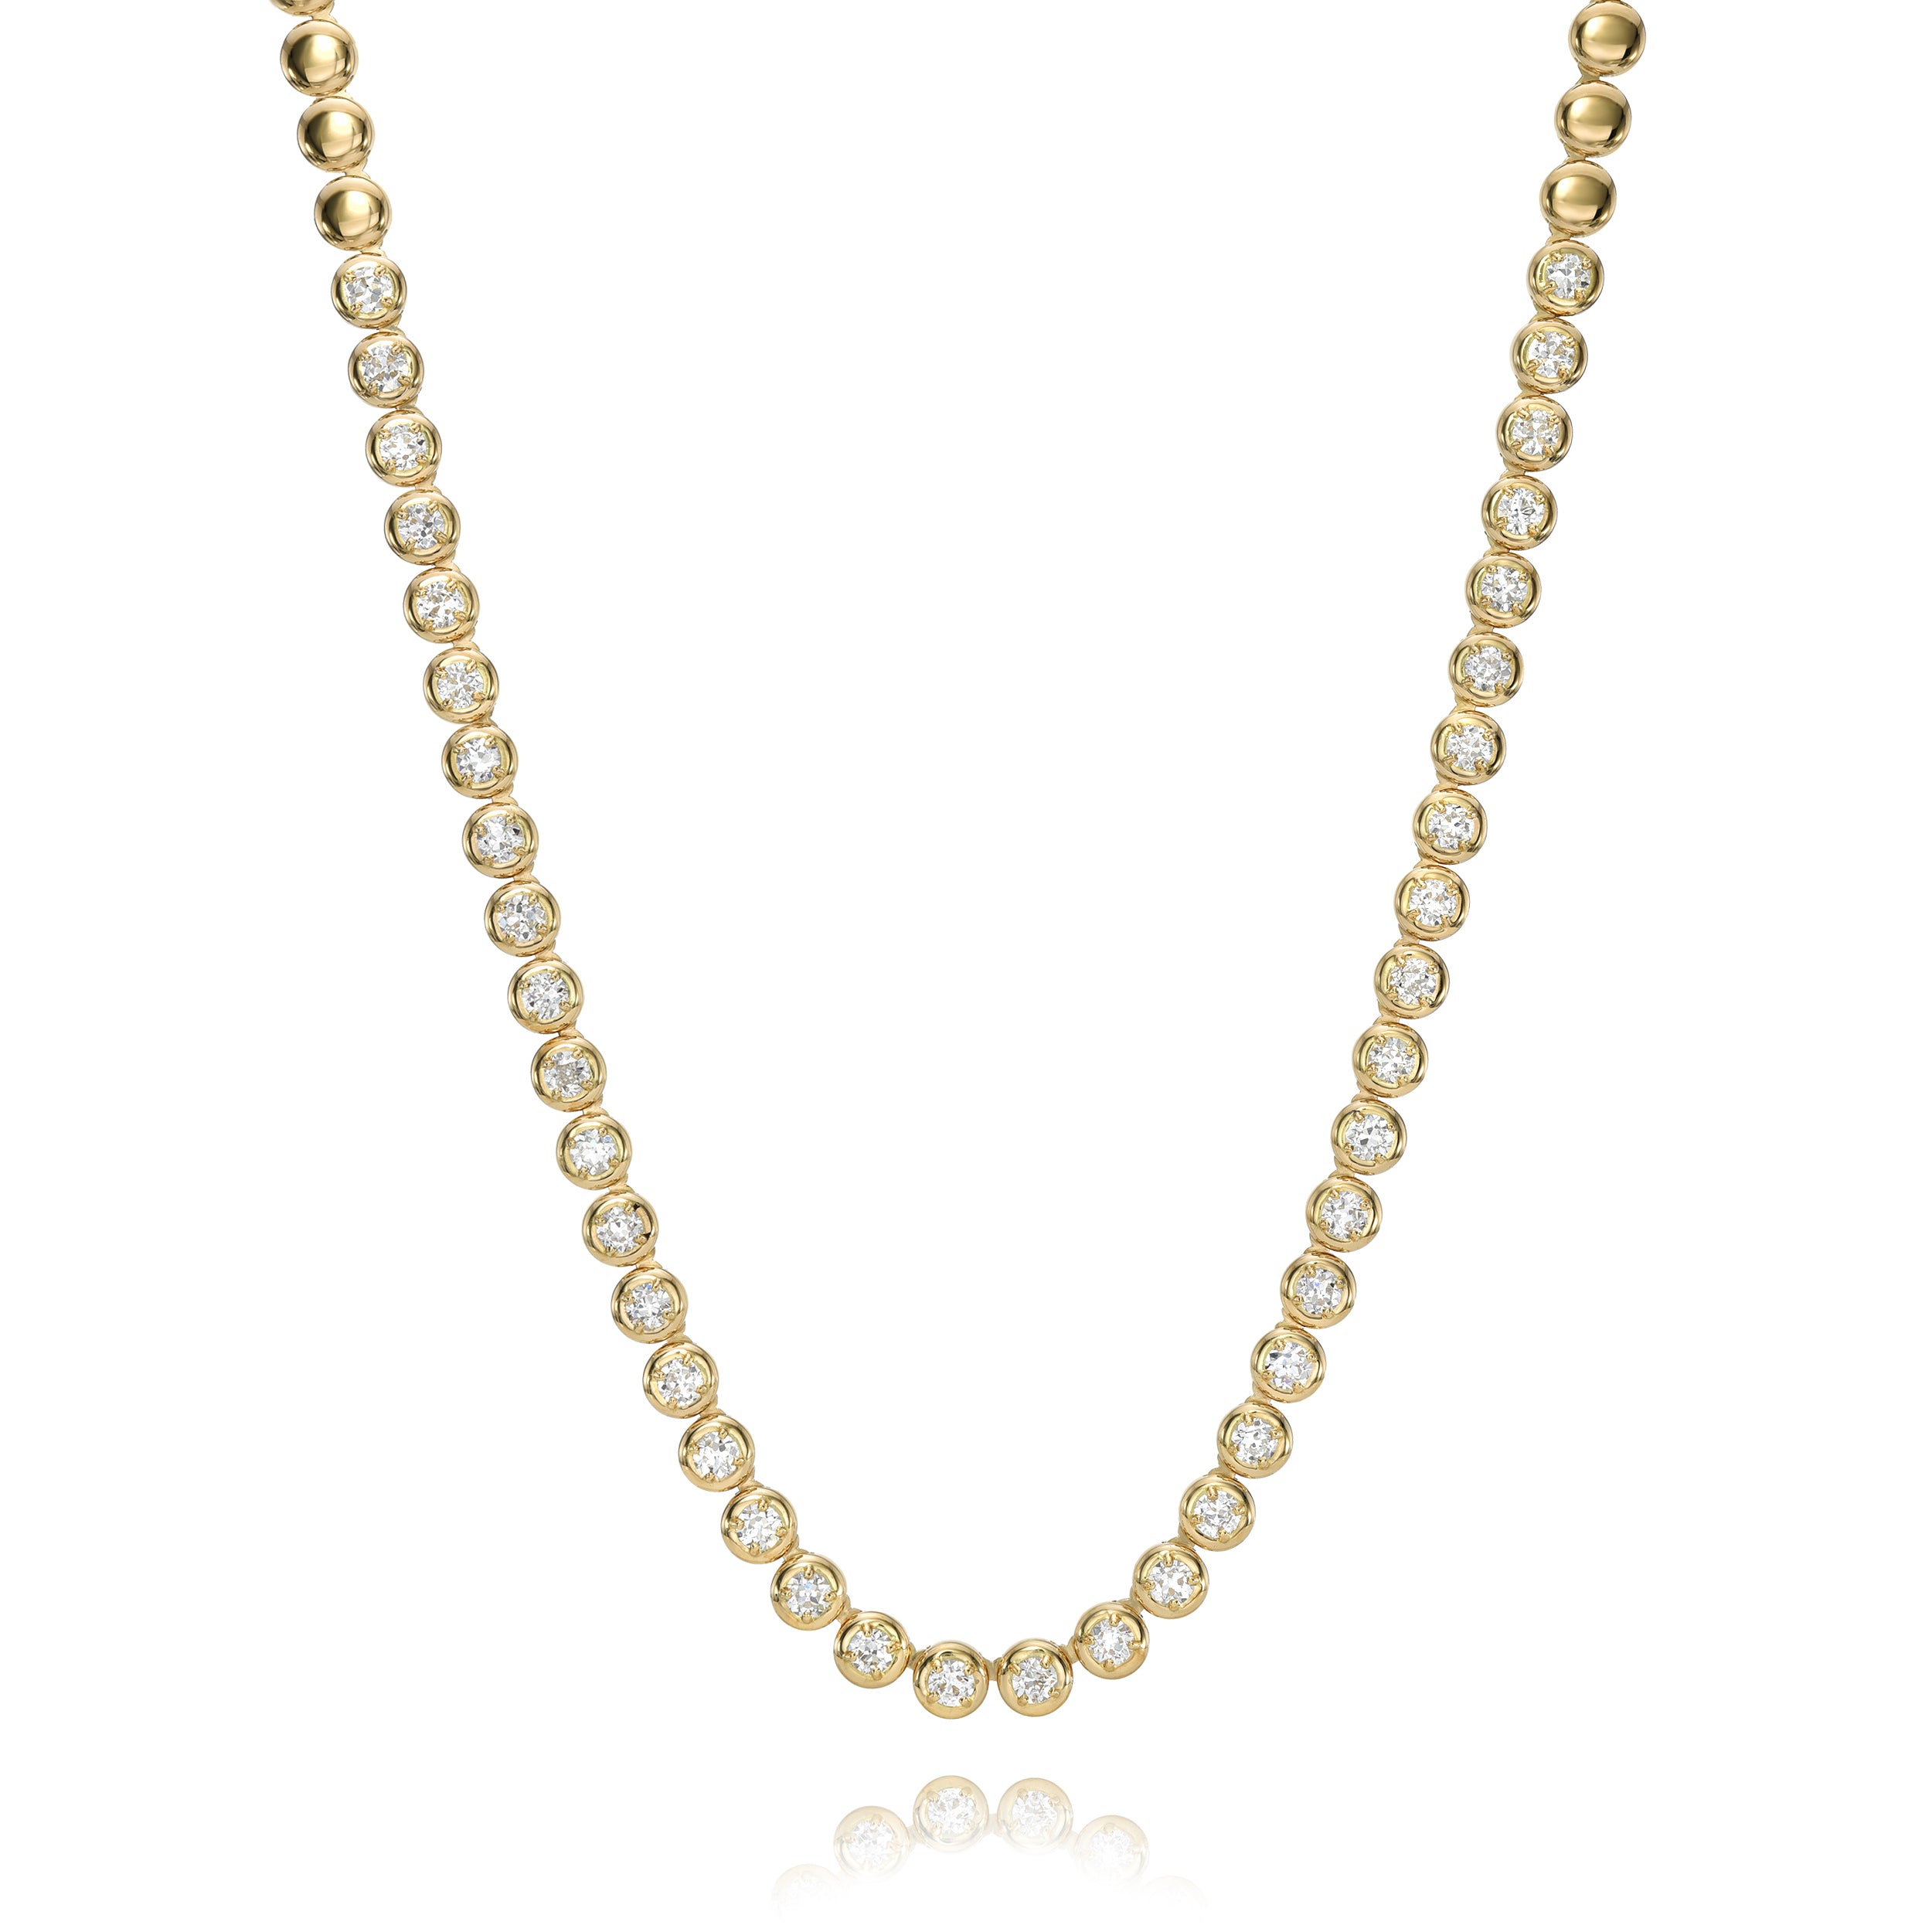 SINGLE STONE RANDI RIVIERA NECKLACE featuring 8.60ctw G-H/VS-SI Old European cut diamonds prong set in a handcrafted 18K yellow gold necklace. Necklace measures 17".